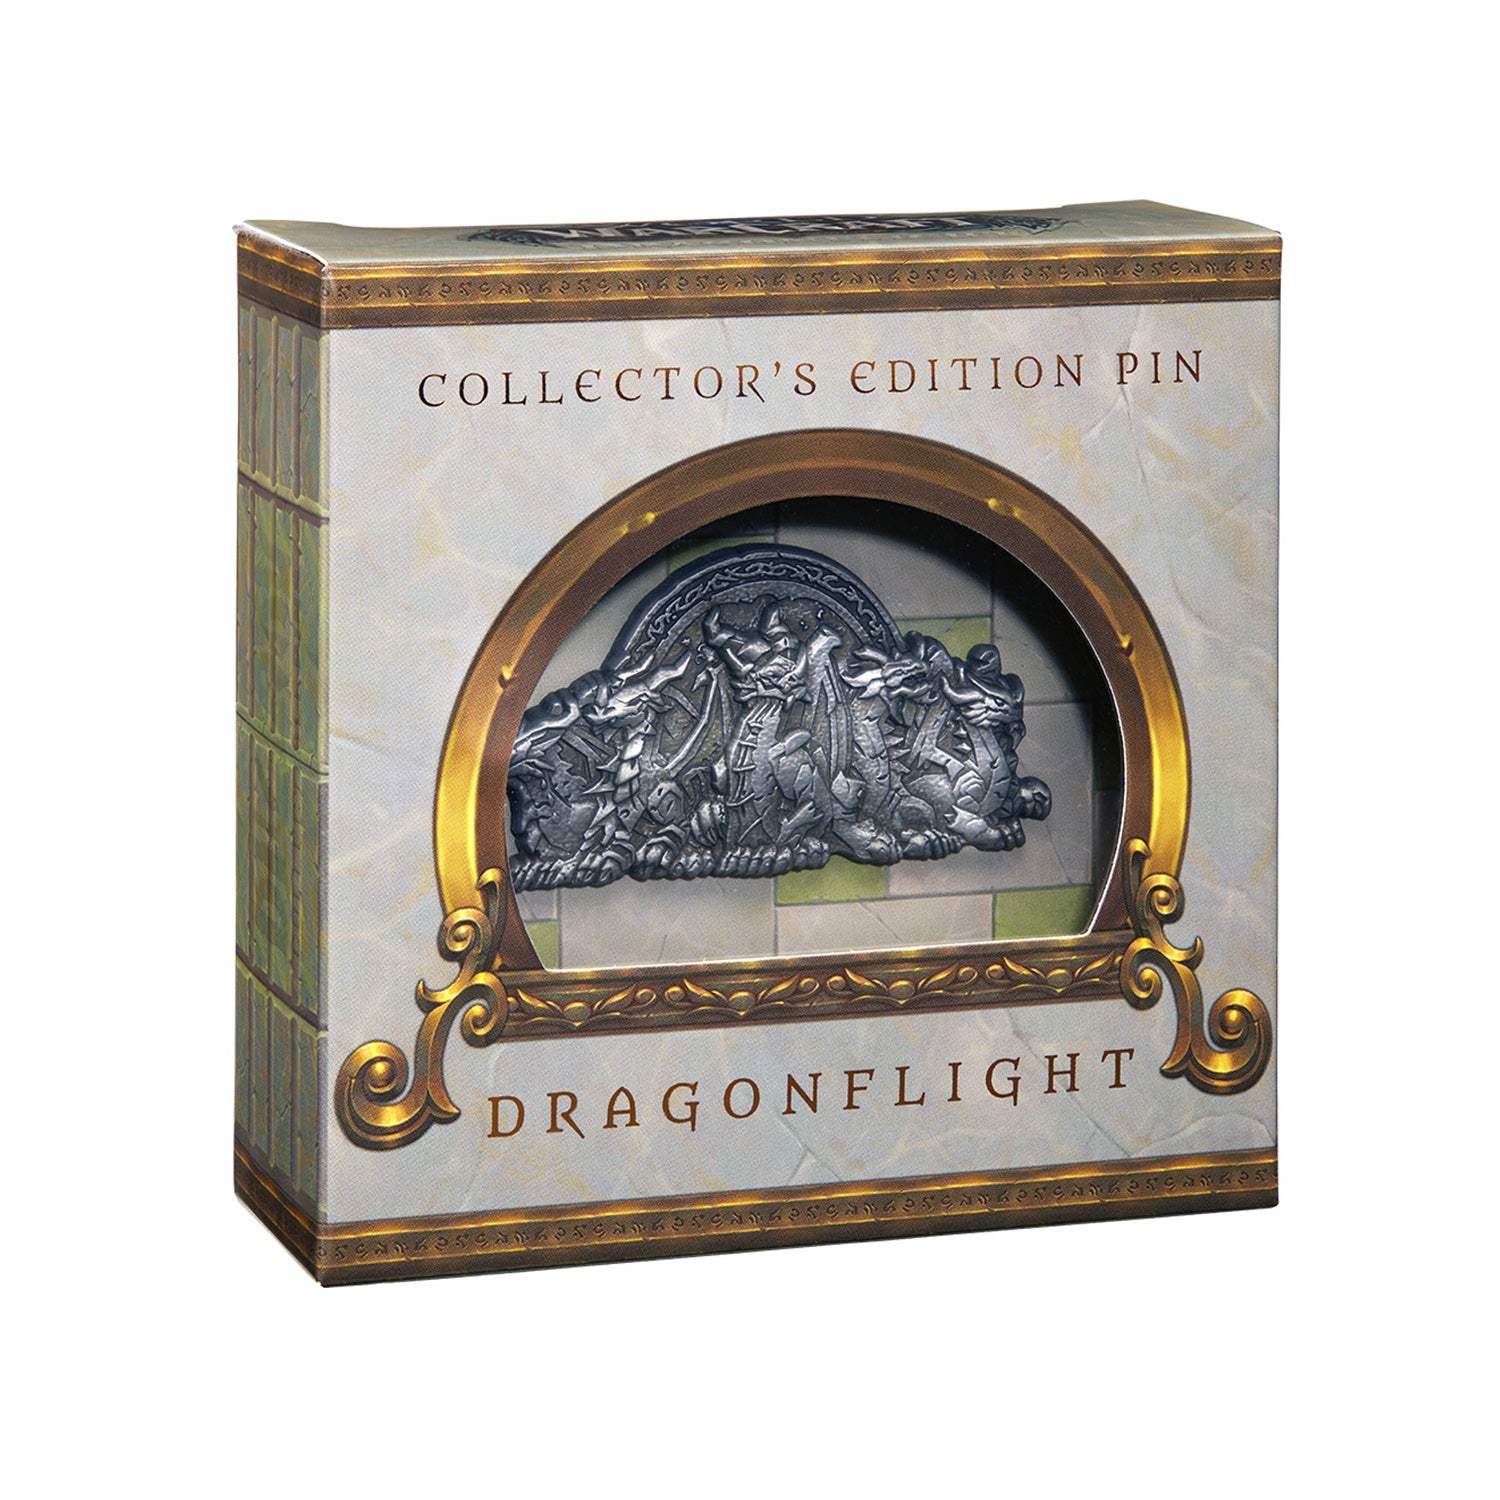 World of Warcraft Dragonflight Dragons Collector's Edition Pin - Front View with Packaging